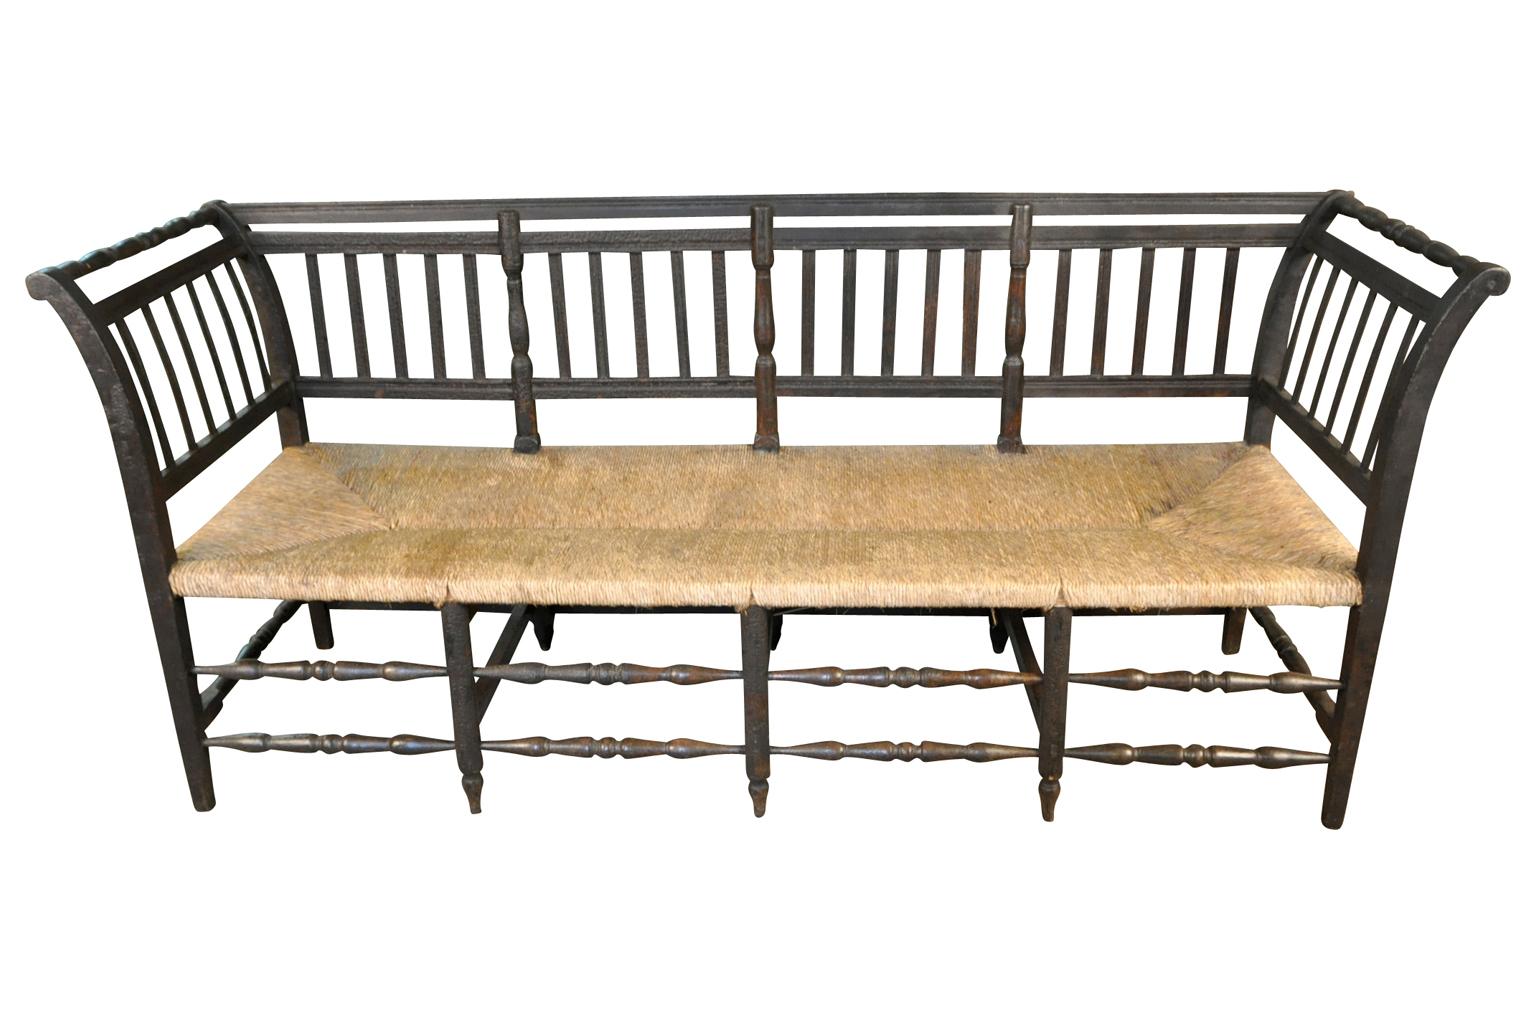 Painted Spanish Mid-19th Century Banquette, Bench